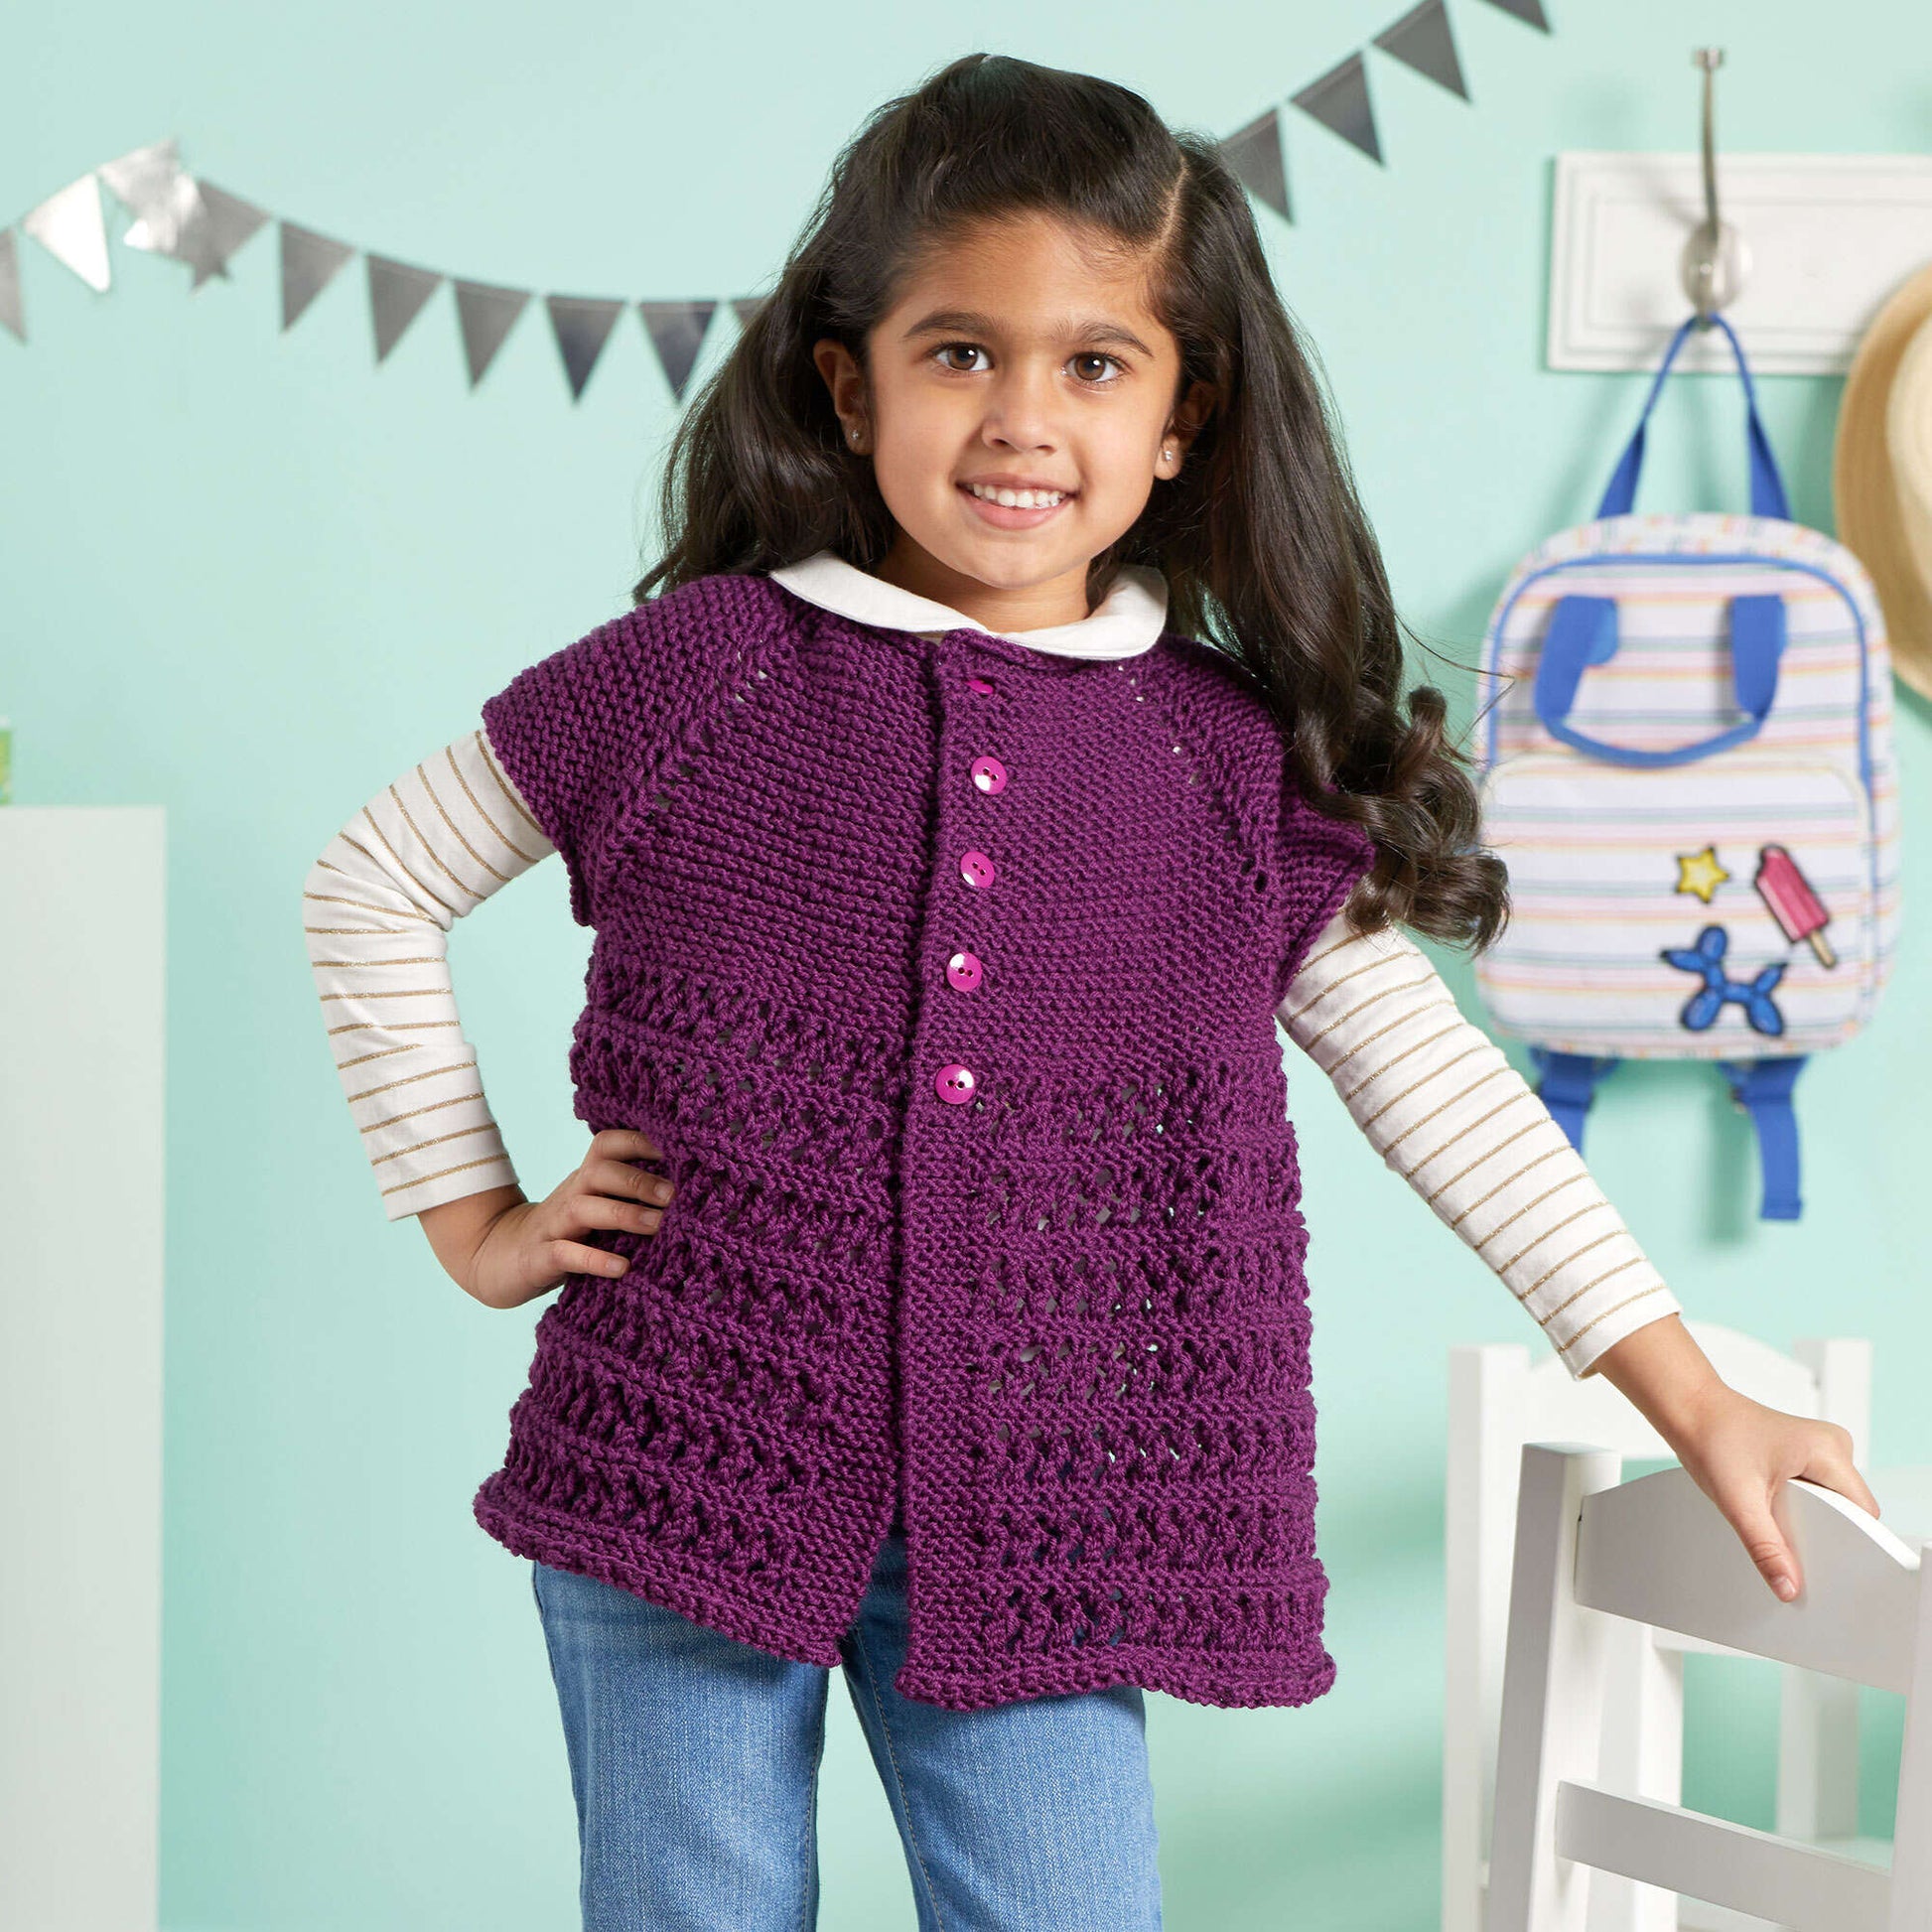 Free Red Heart Chic Girly Knit Cardigan Pattern